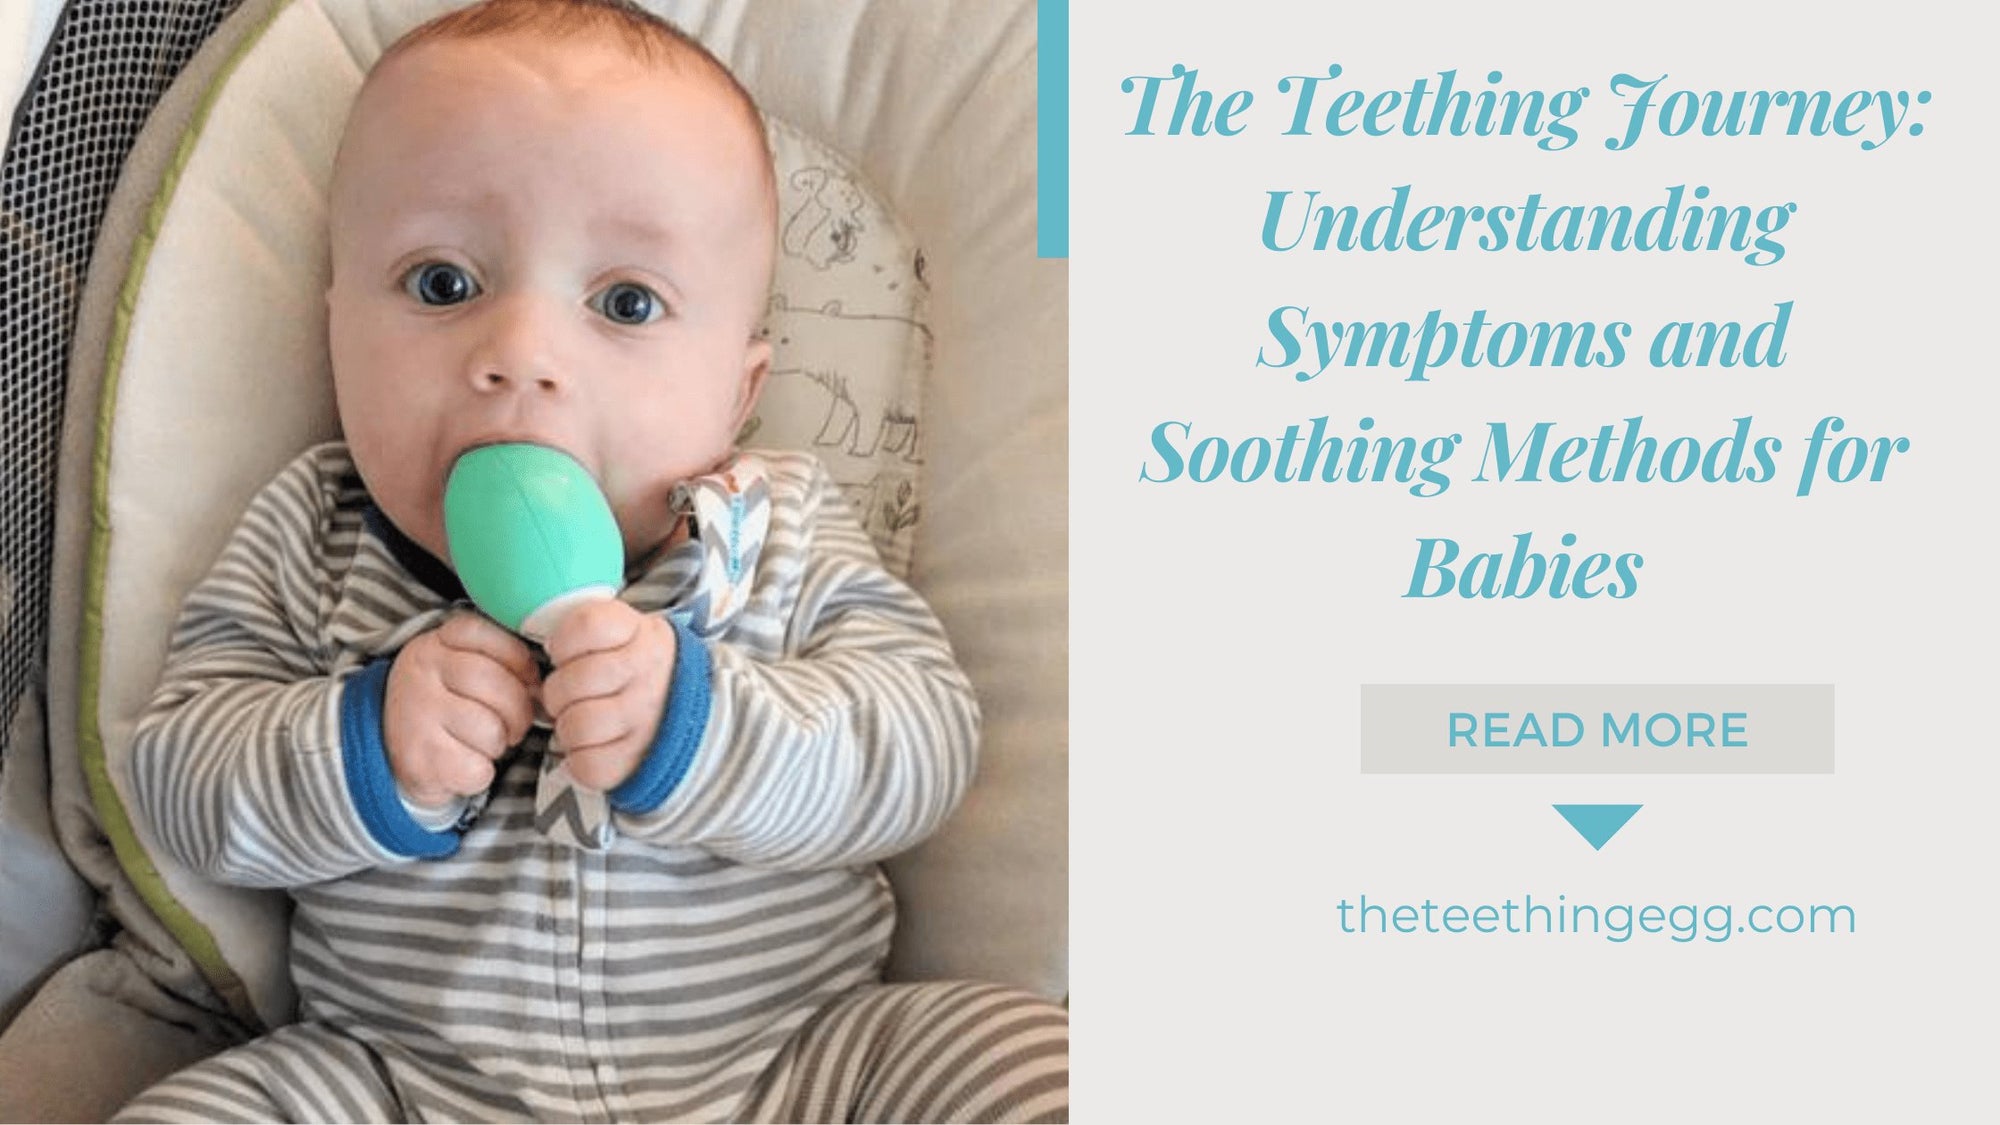 The Teething Journey: Understanding Symptoms and Soothing Methods for Babies